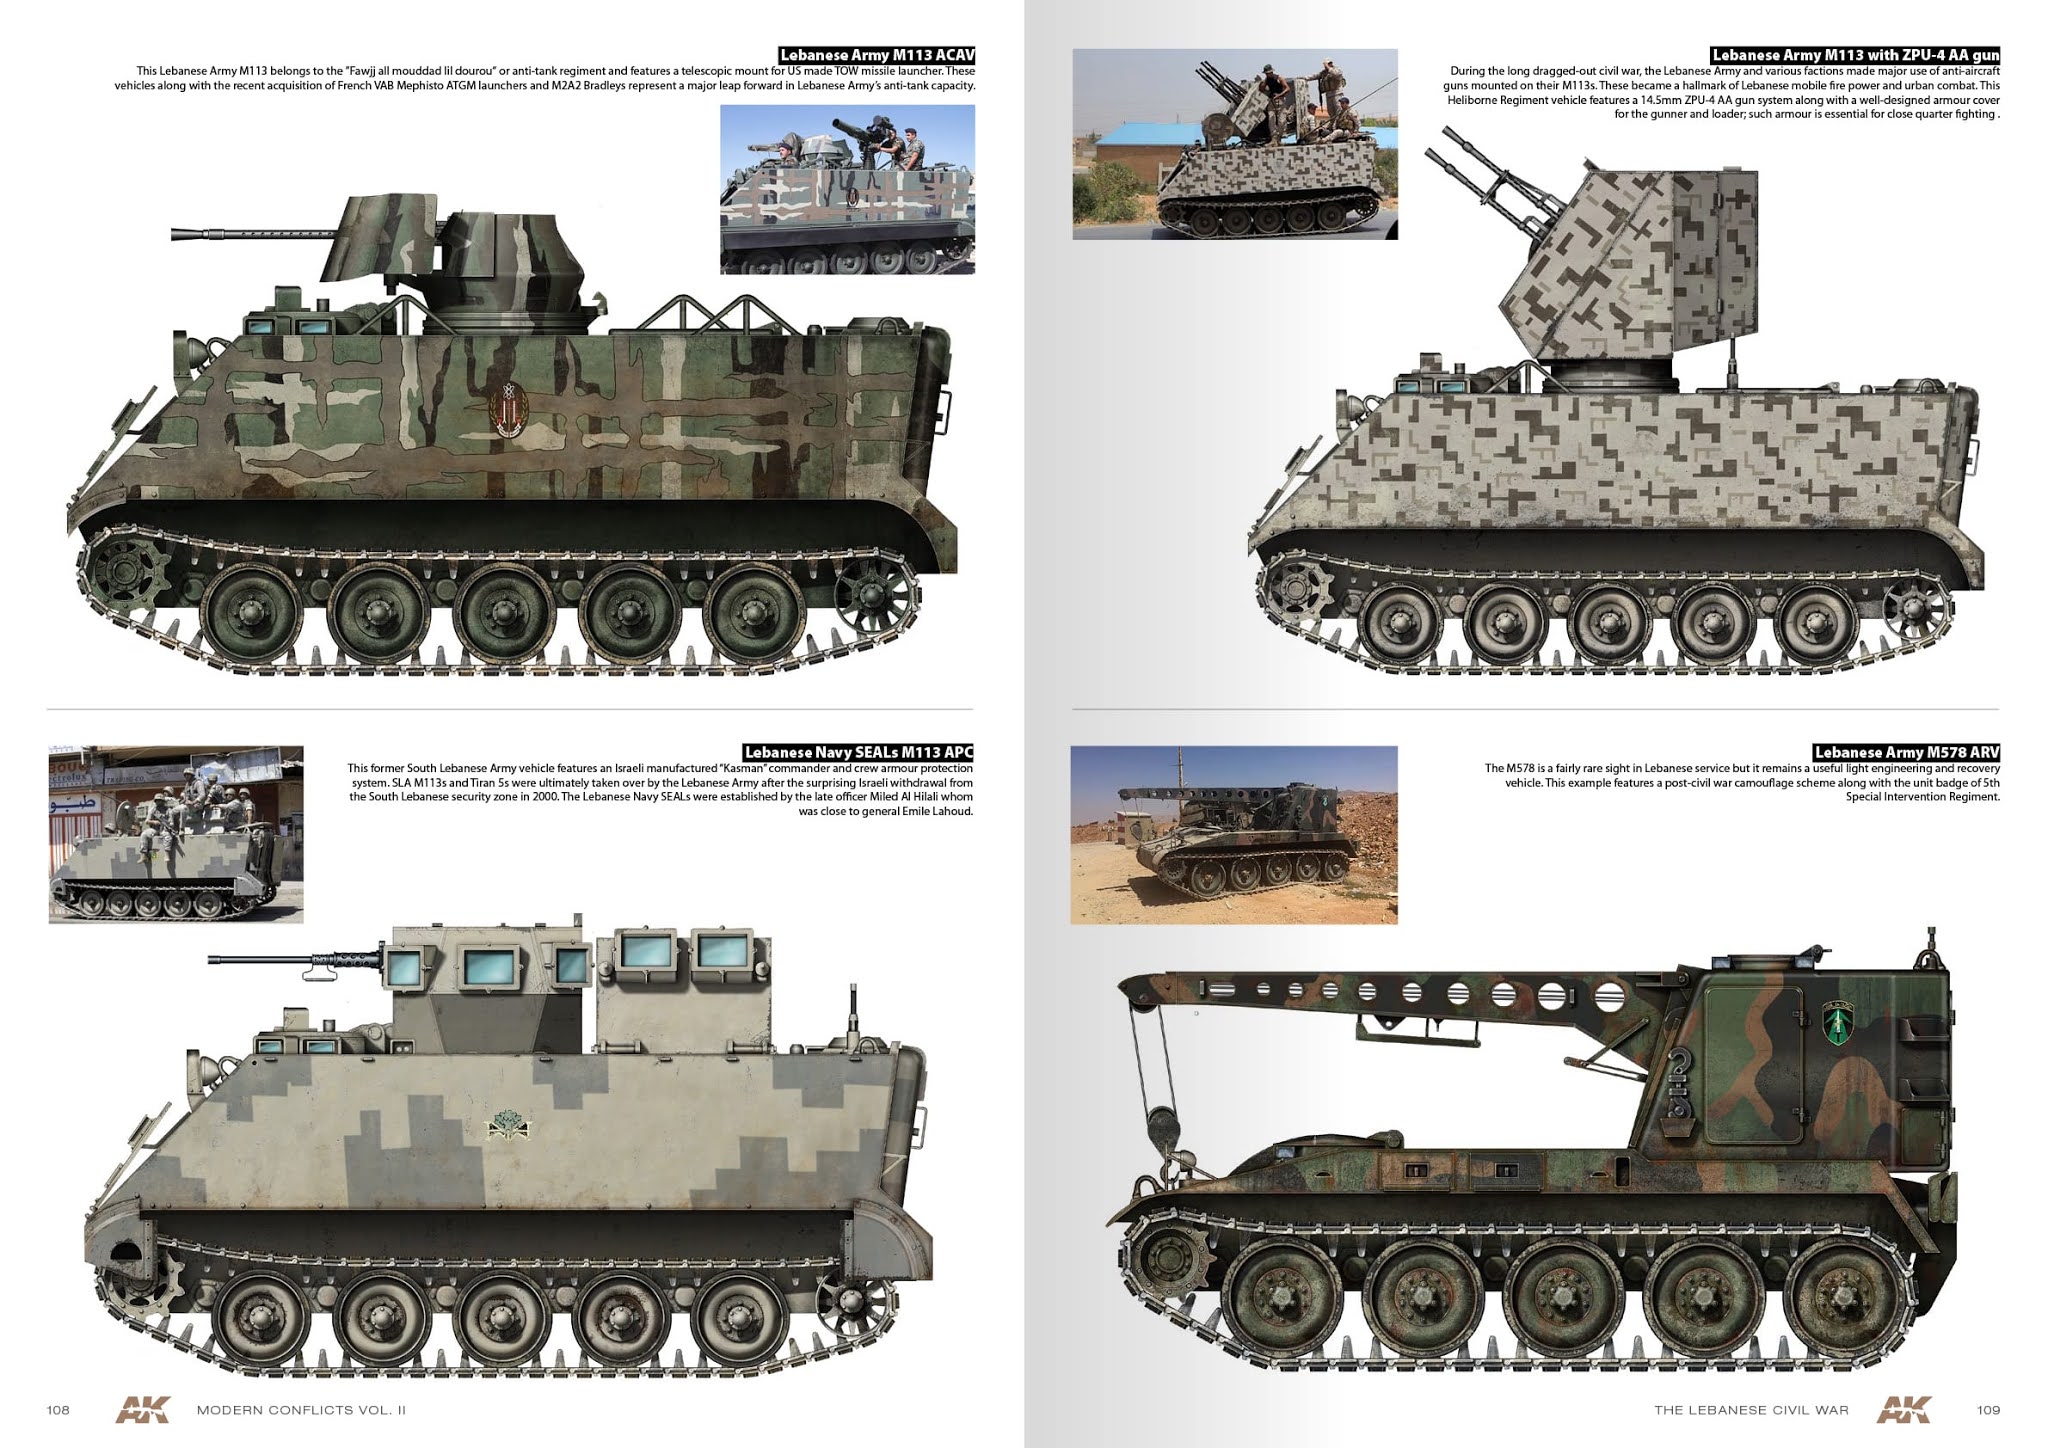 The Modelling News: Preview: AK Interactive's new items for July.